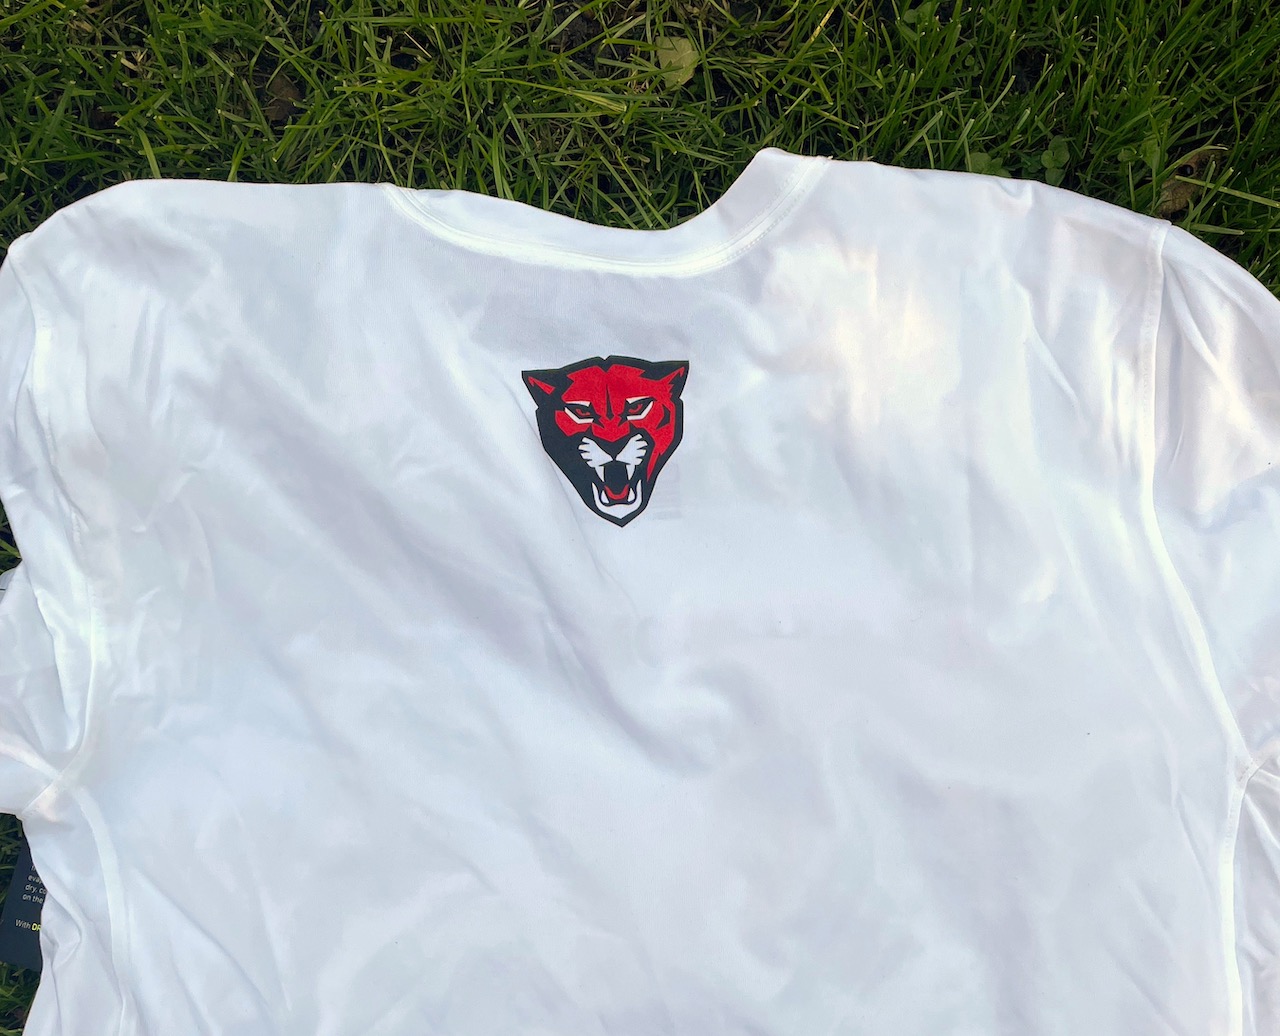 2022 shirt back with Cougar